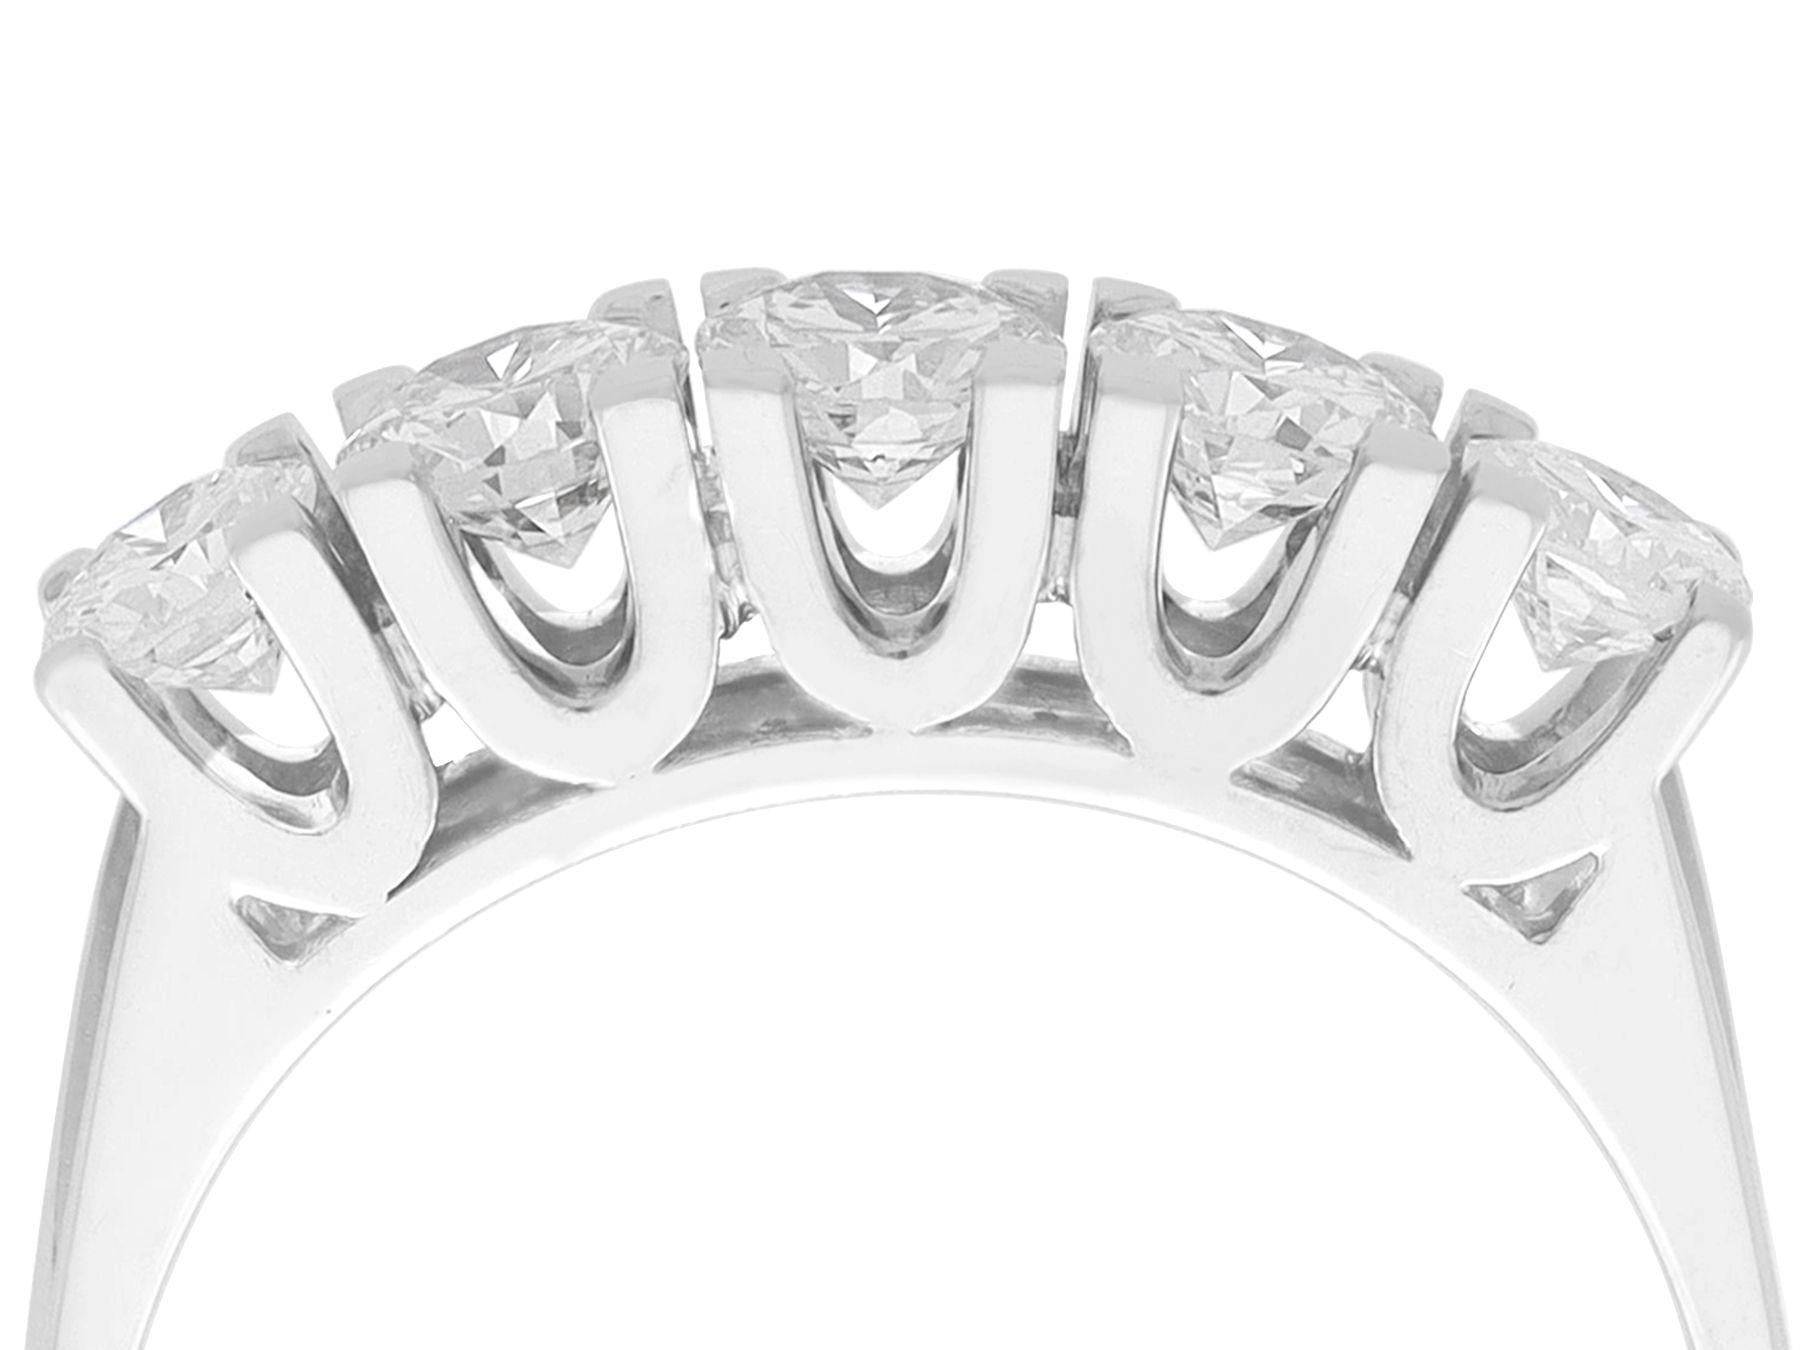 A stunning, fine and impressive 1.46 diamond and 18 karat white gold five stone ring; part of our diverse vintage jewelry and estate jewelry collections.

This fine and impressive vintage five stone diamond ring has been crafted in 18k white